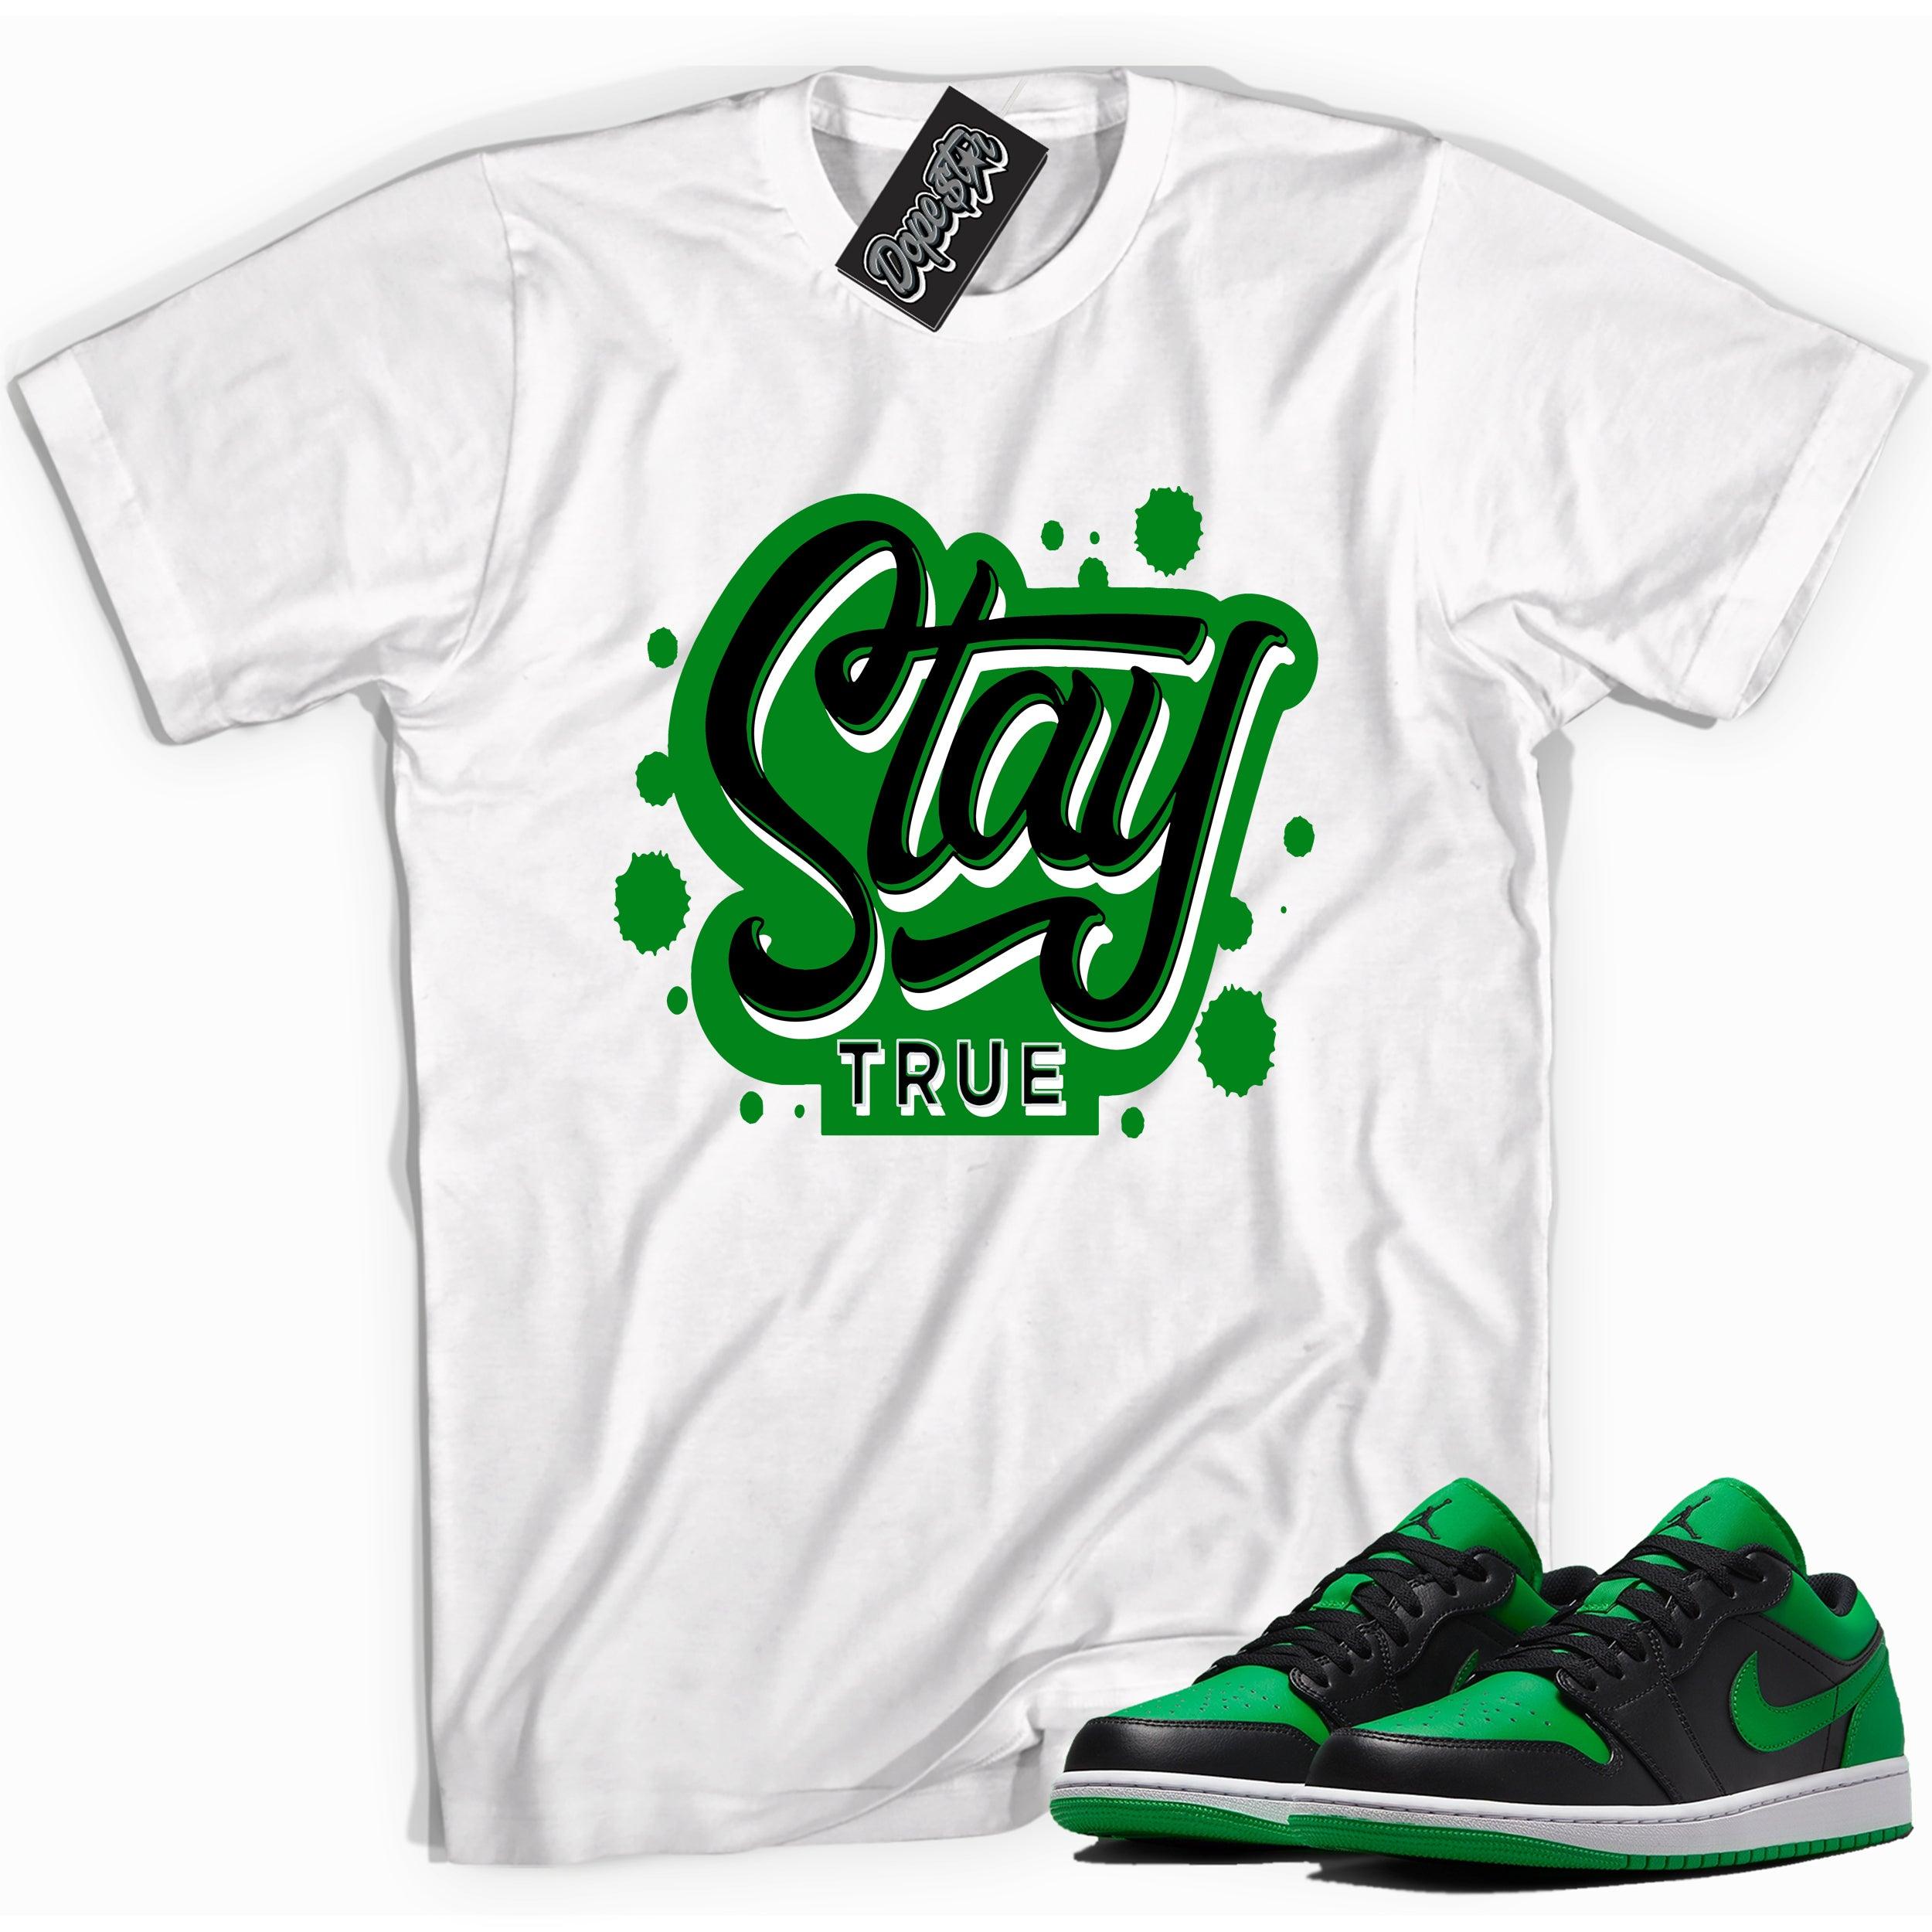 Cool white graphic tee with 'stay true' print, that perfectly matches Air Jordan 1 Low Lucky Green sneakers